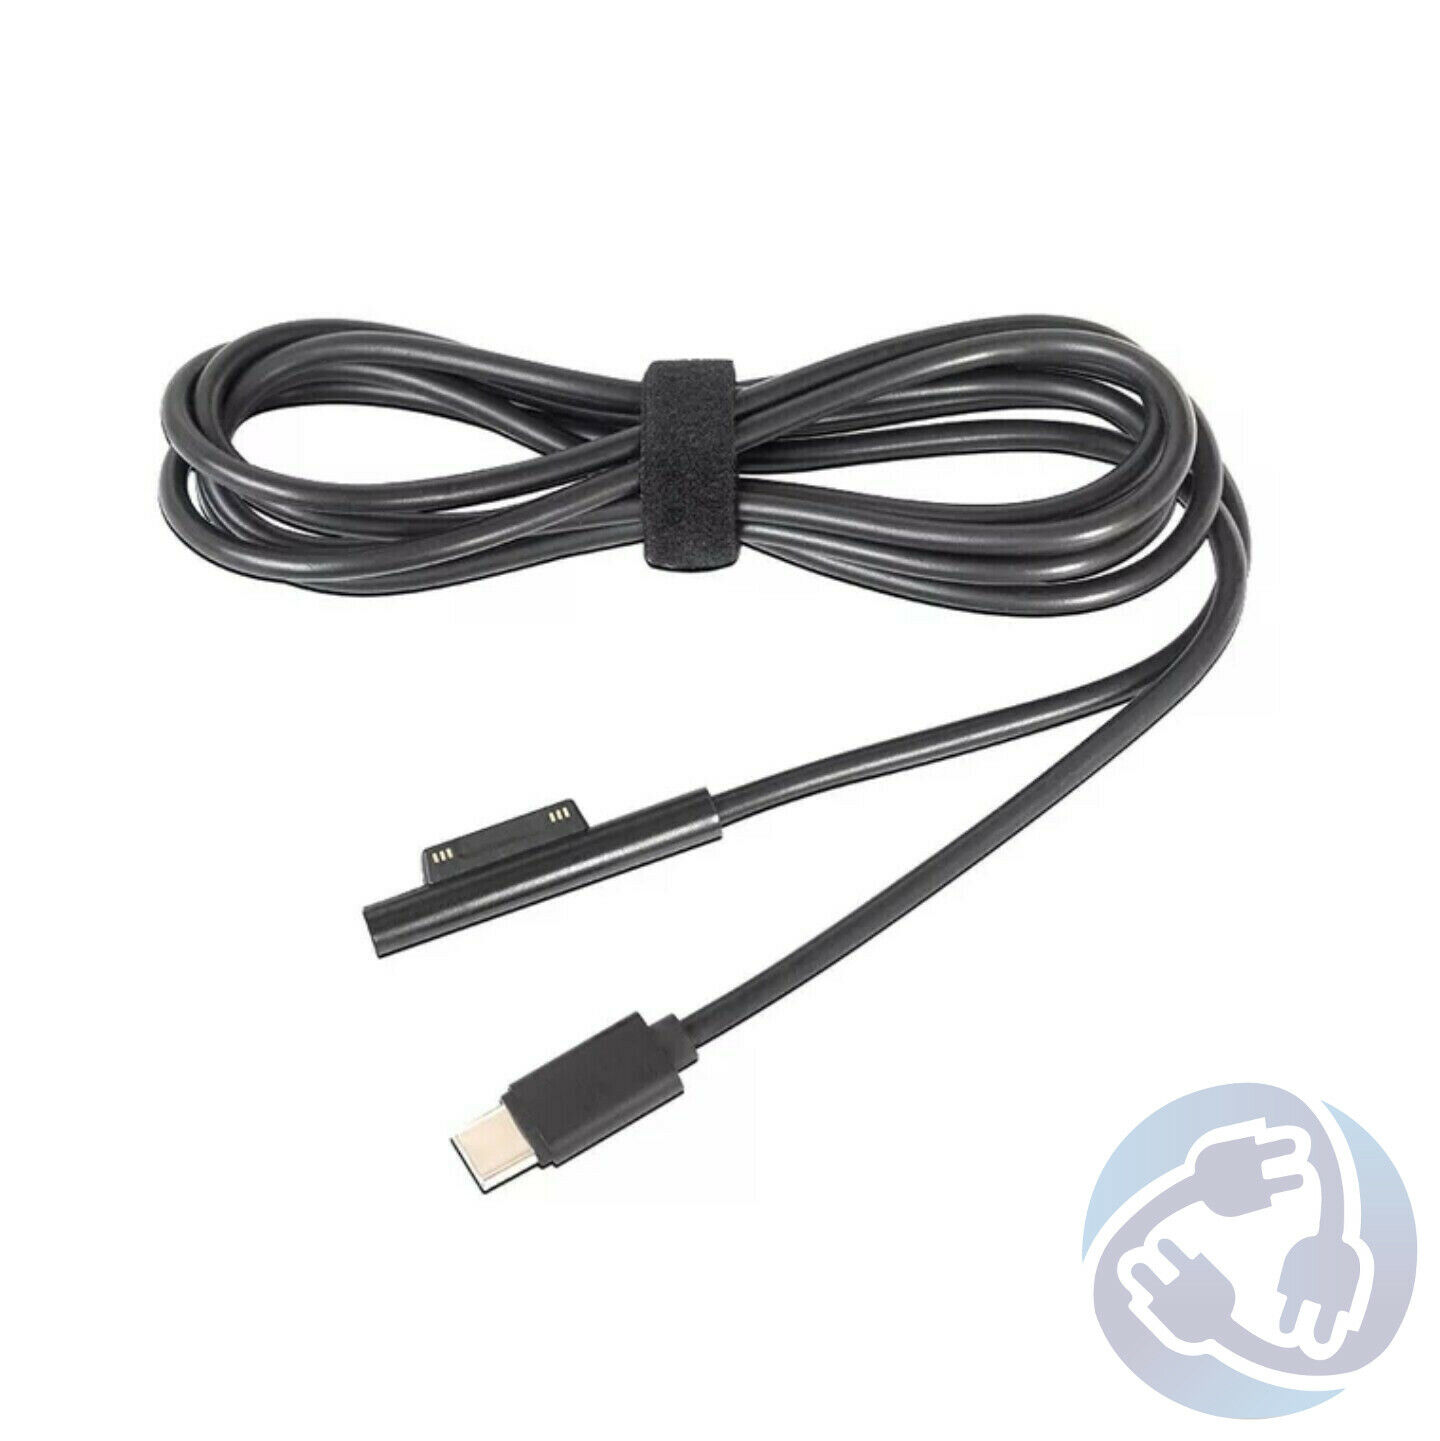 USB Type C Power Charging Sync Cable Cord for Microsoft Surface Pro 6 5 4 3